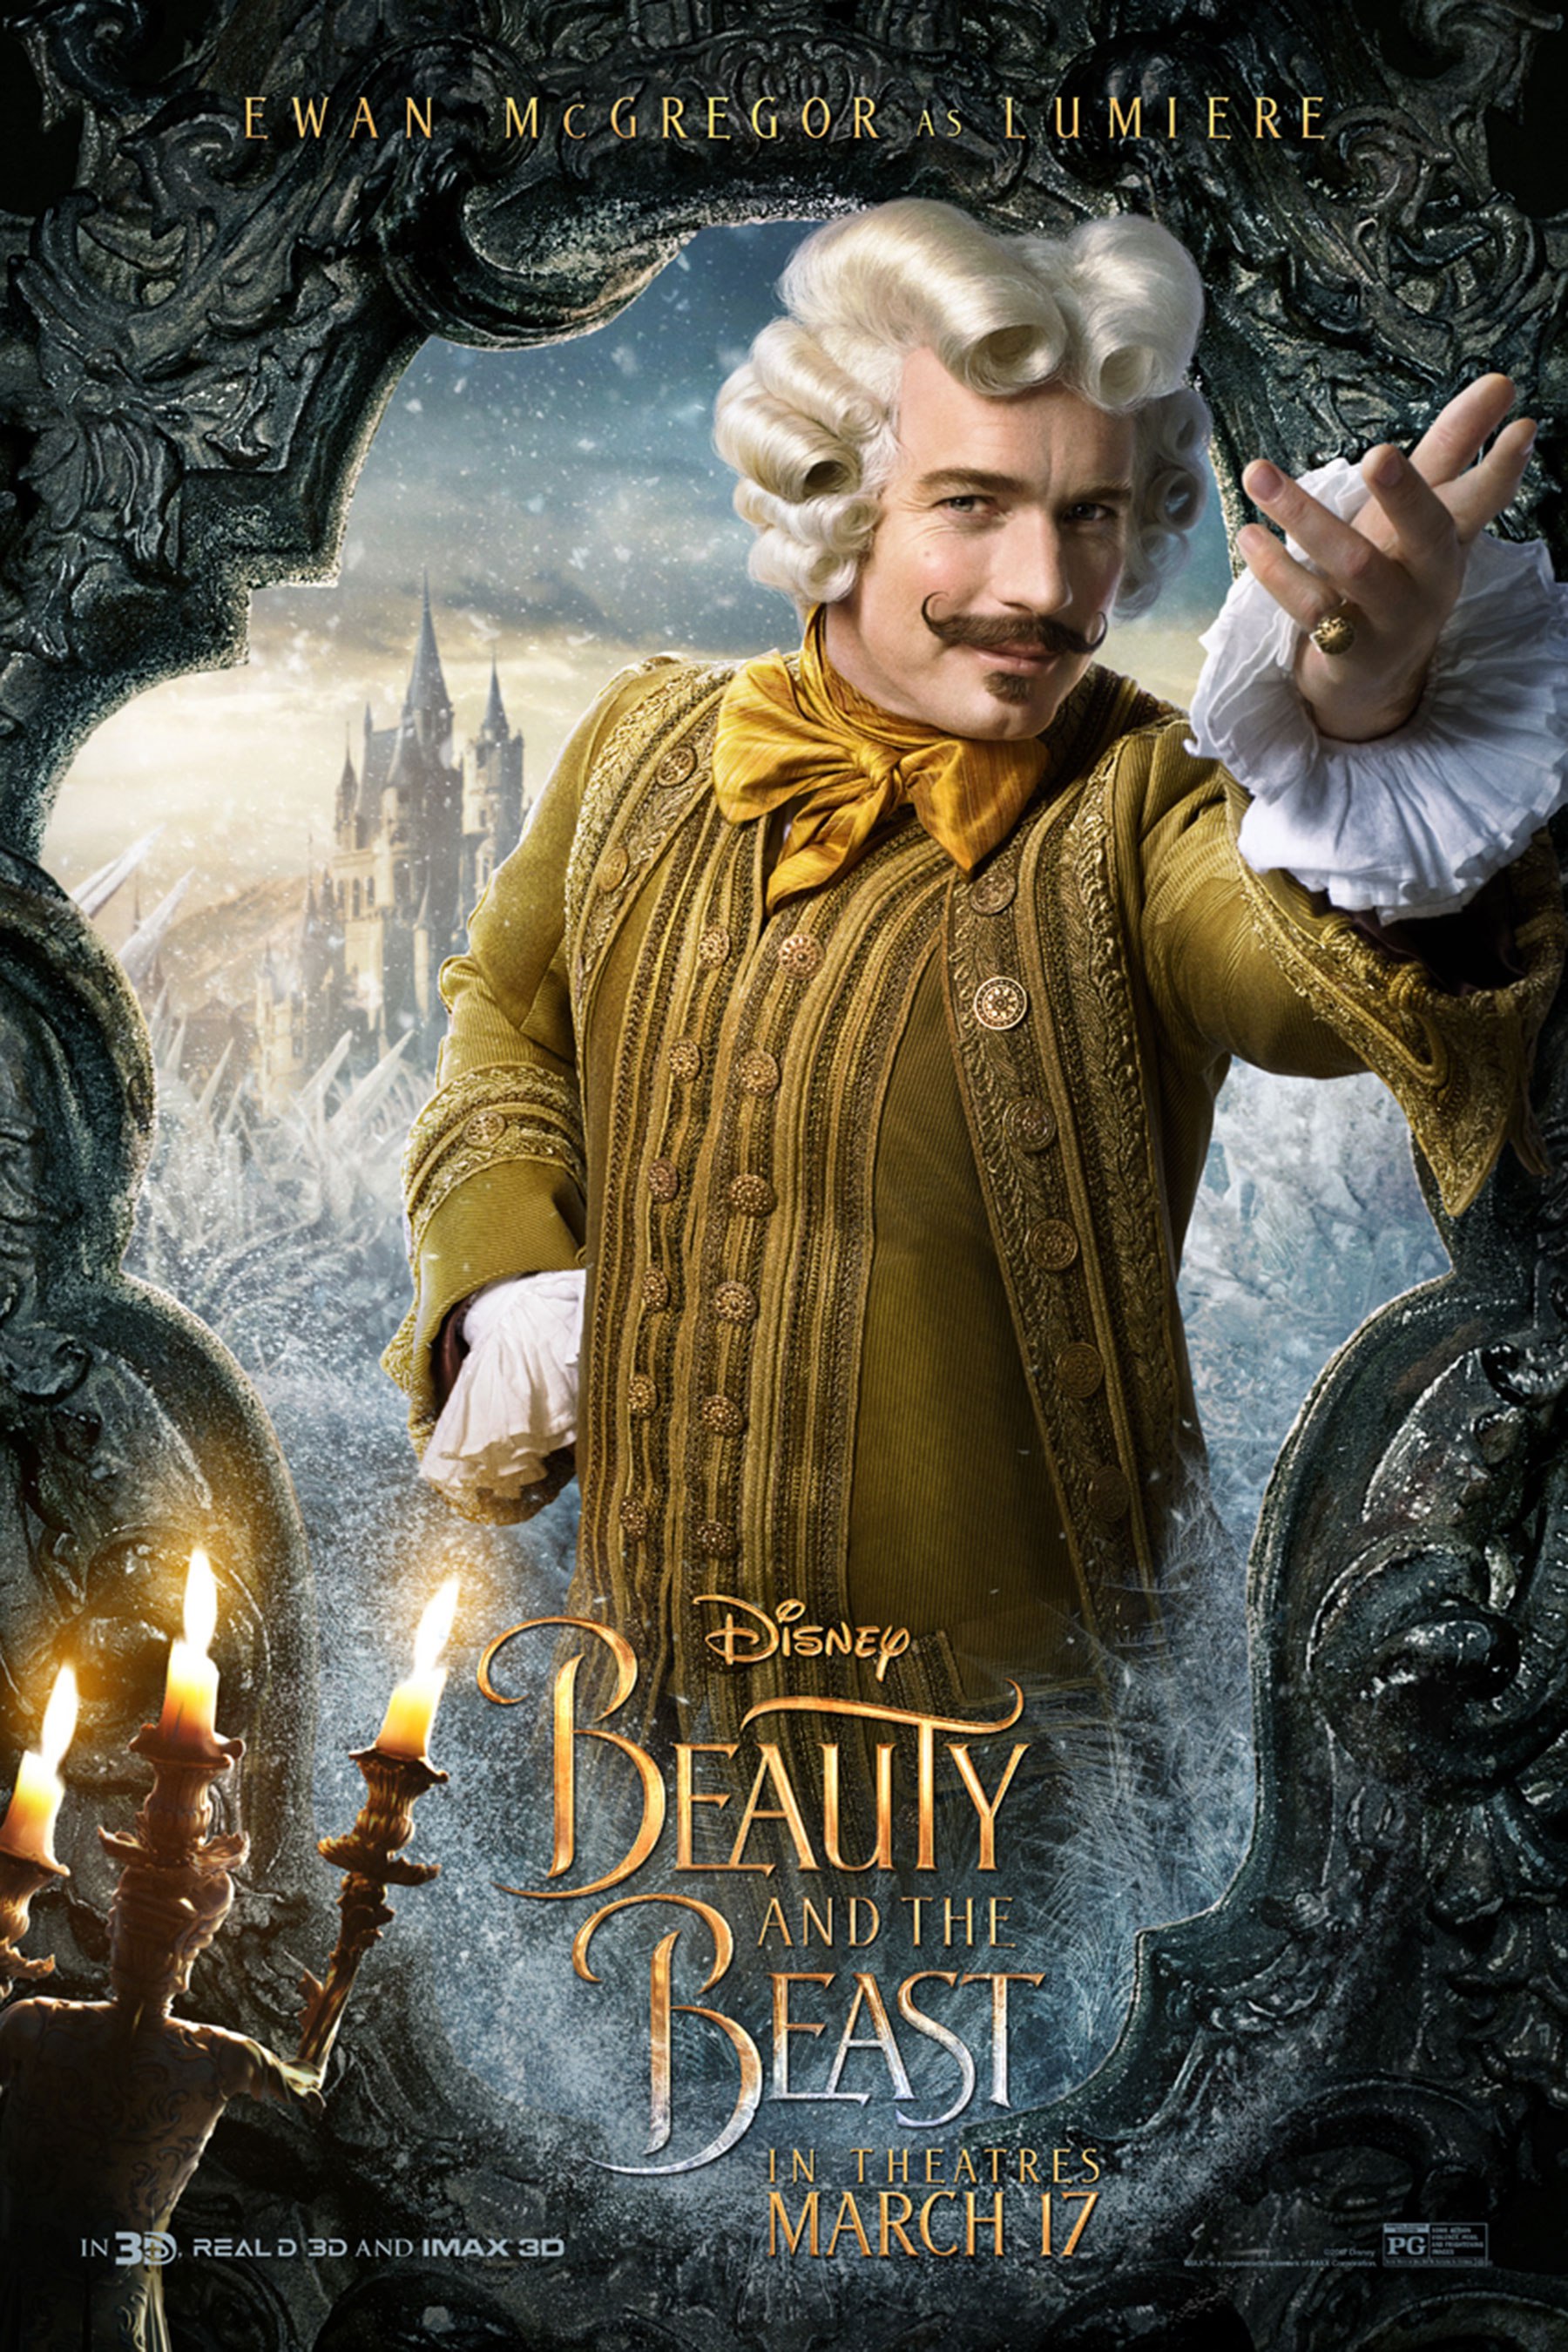 beauty and the beast 2017 full movie online